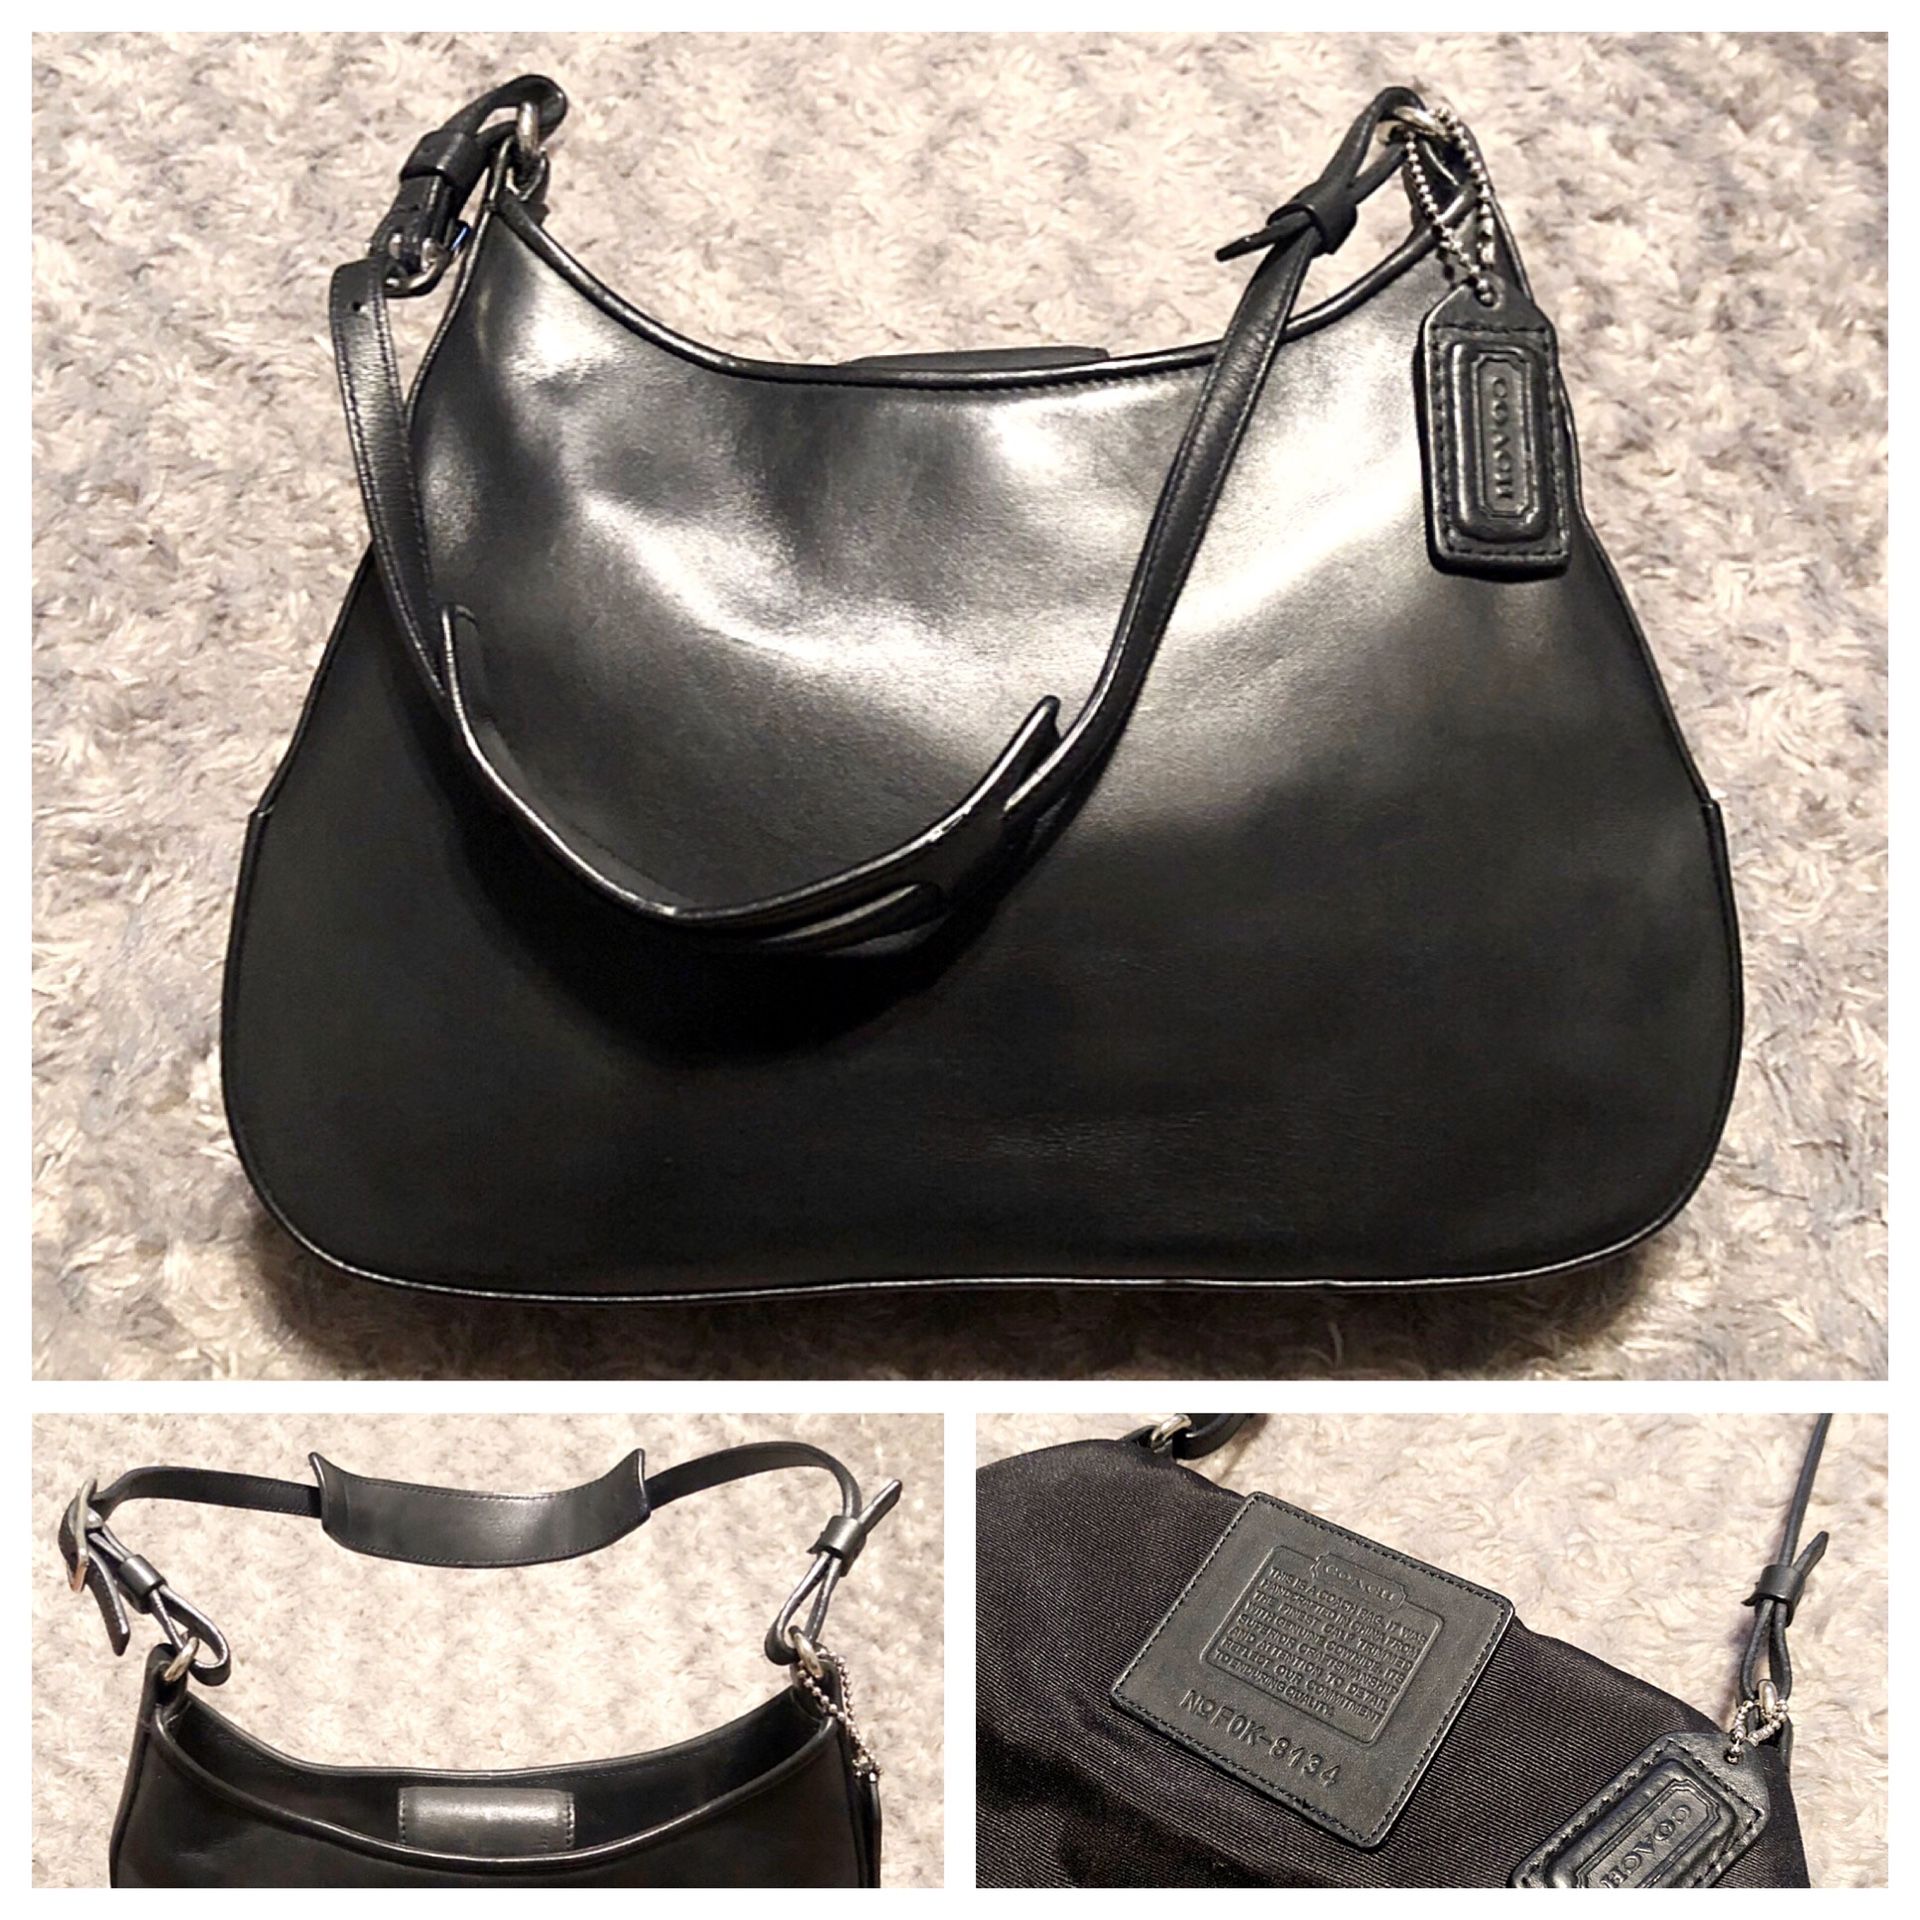 Coach Calf Skin Hobo paid $298 Like new! Shoulder Bag # FOK-8134 comes with dust bag! Excellent condition clean interior/exterior! Measurements: 10"